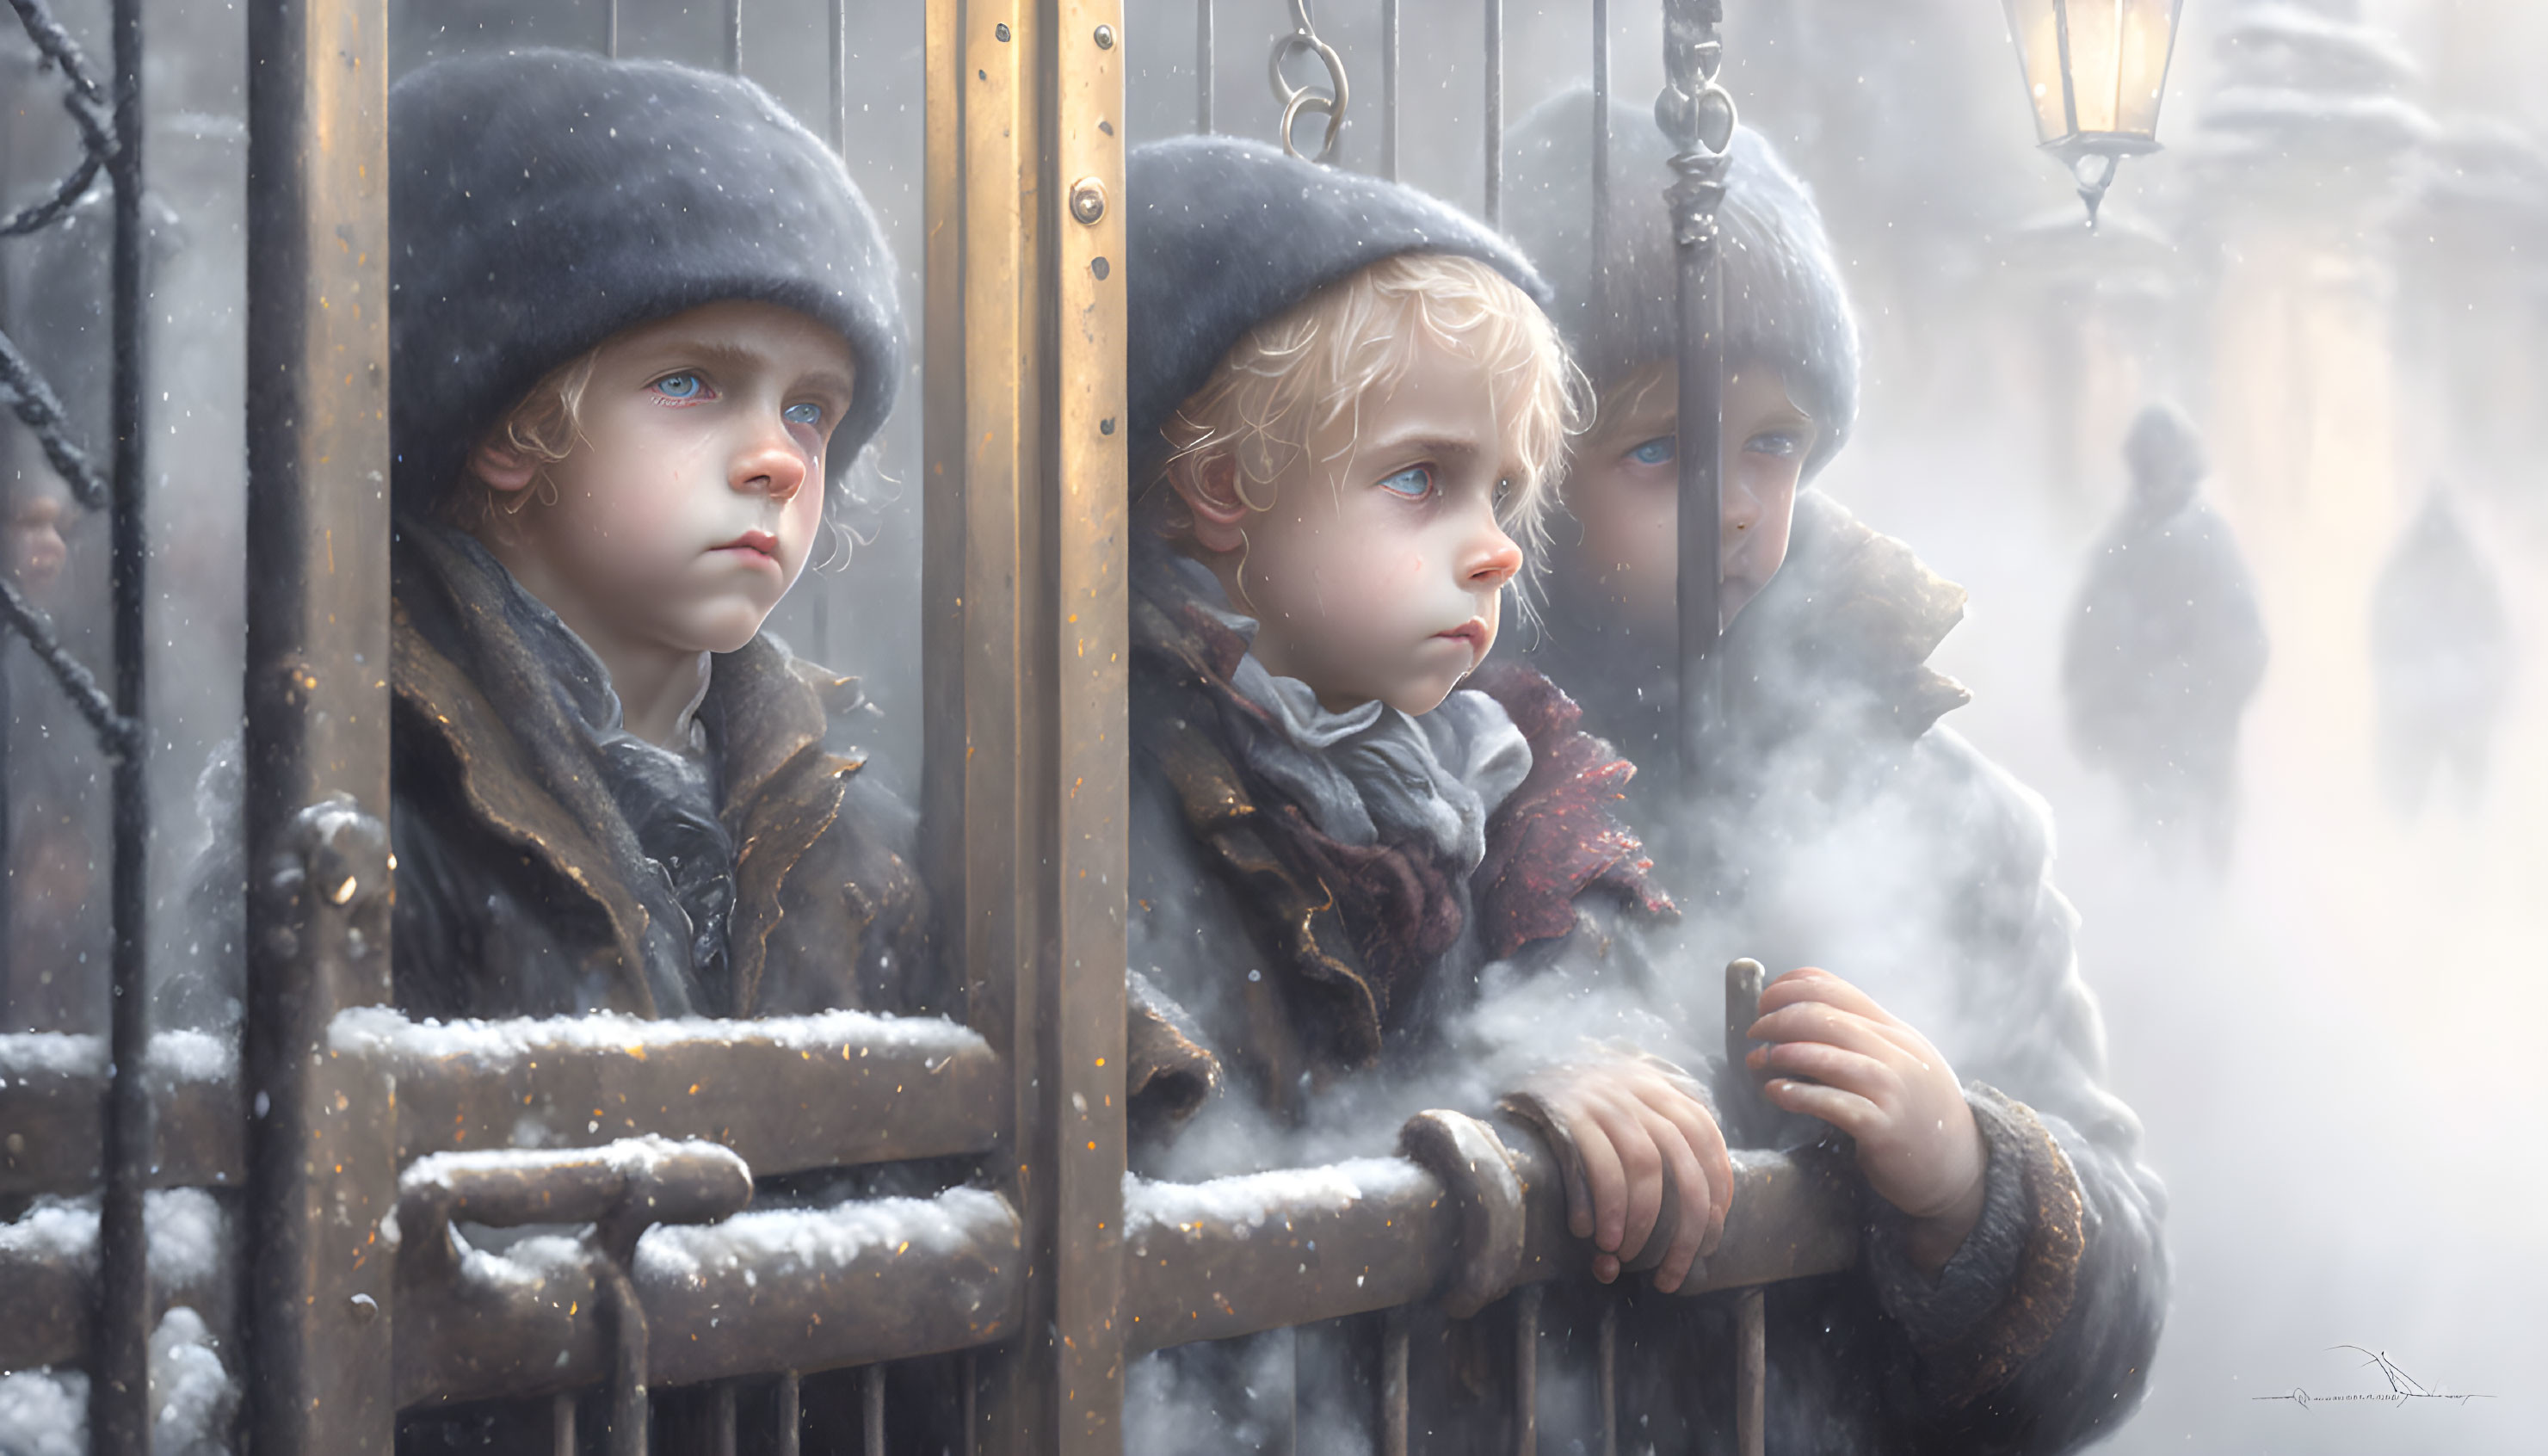 Children in winter clothing looking through snowy gate with curious expressions